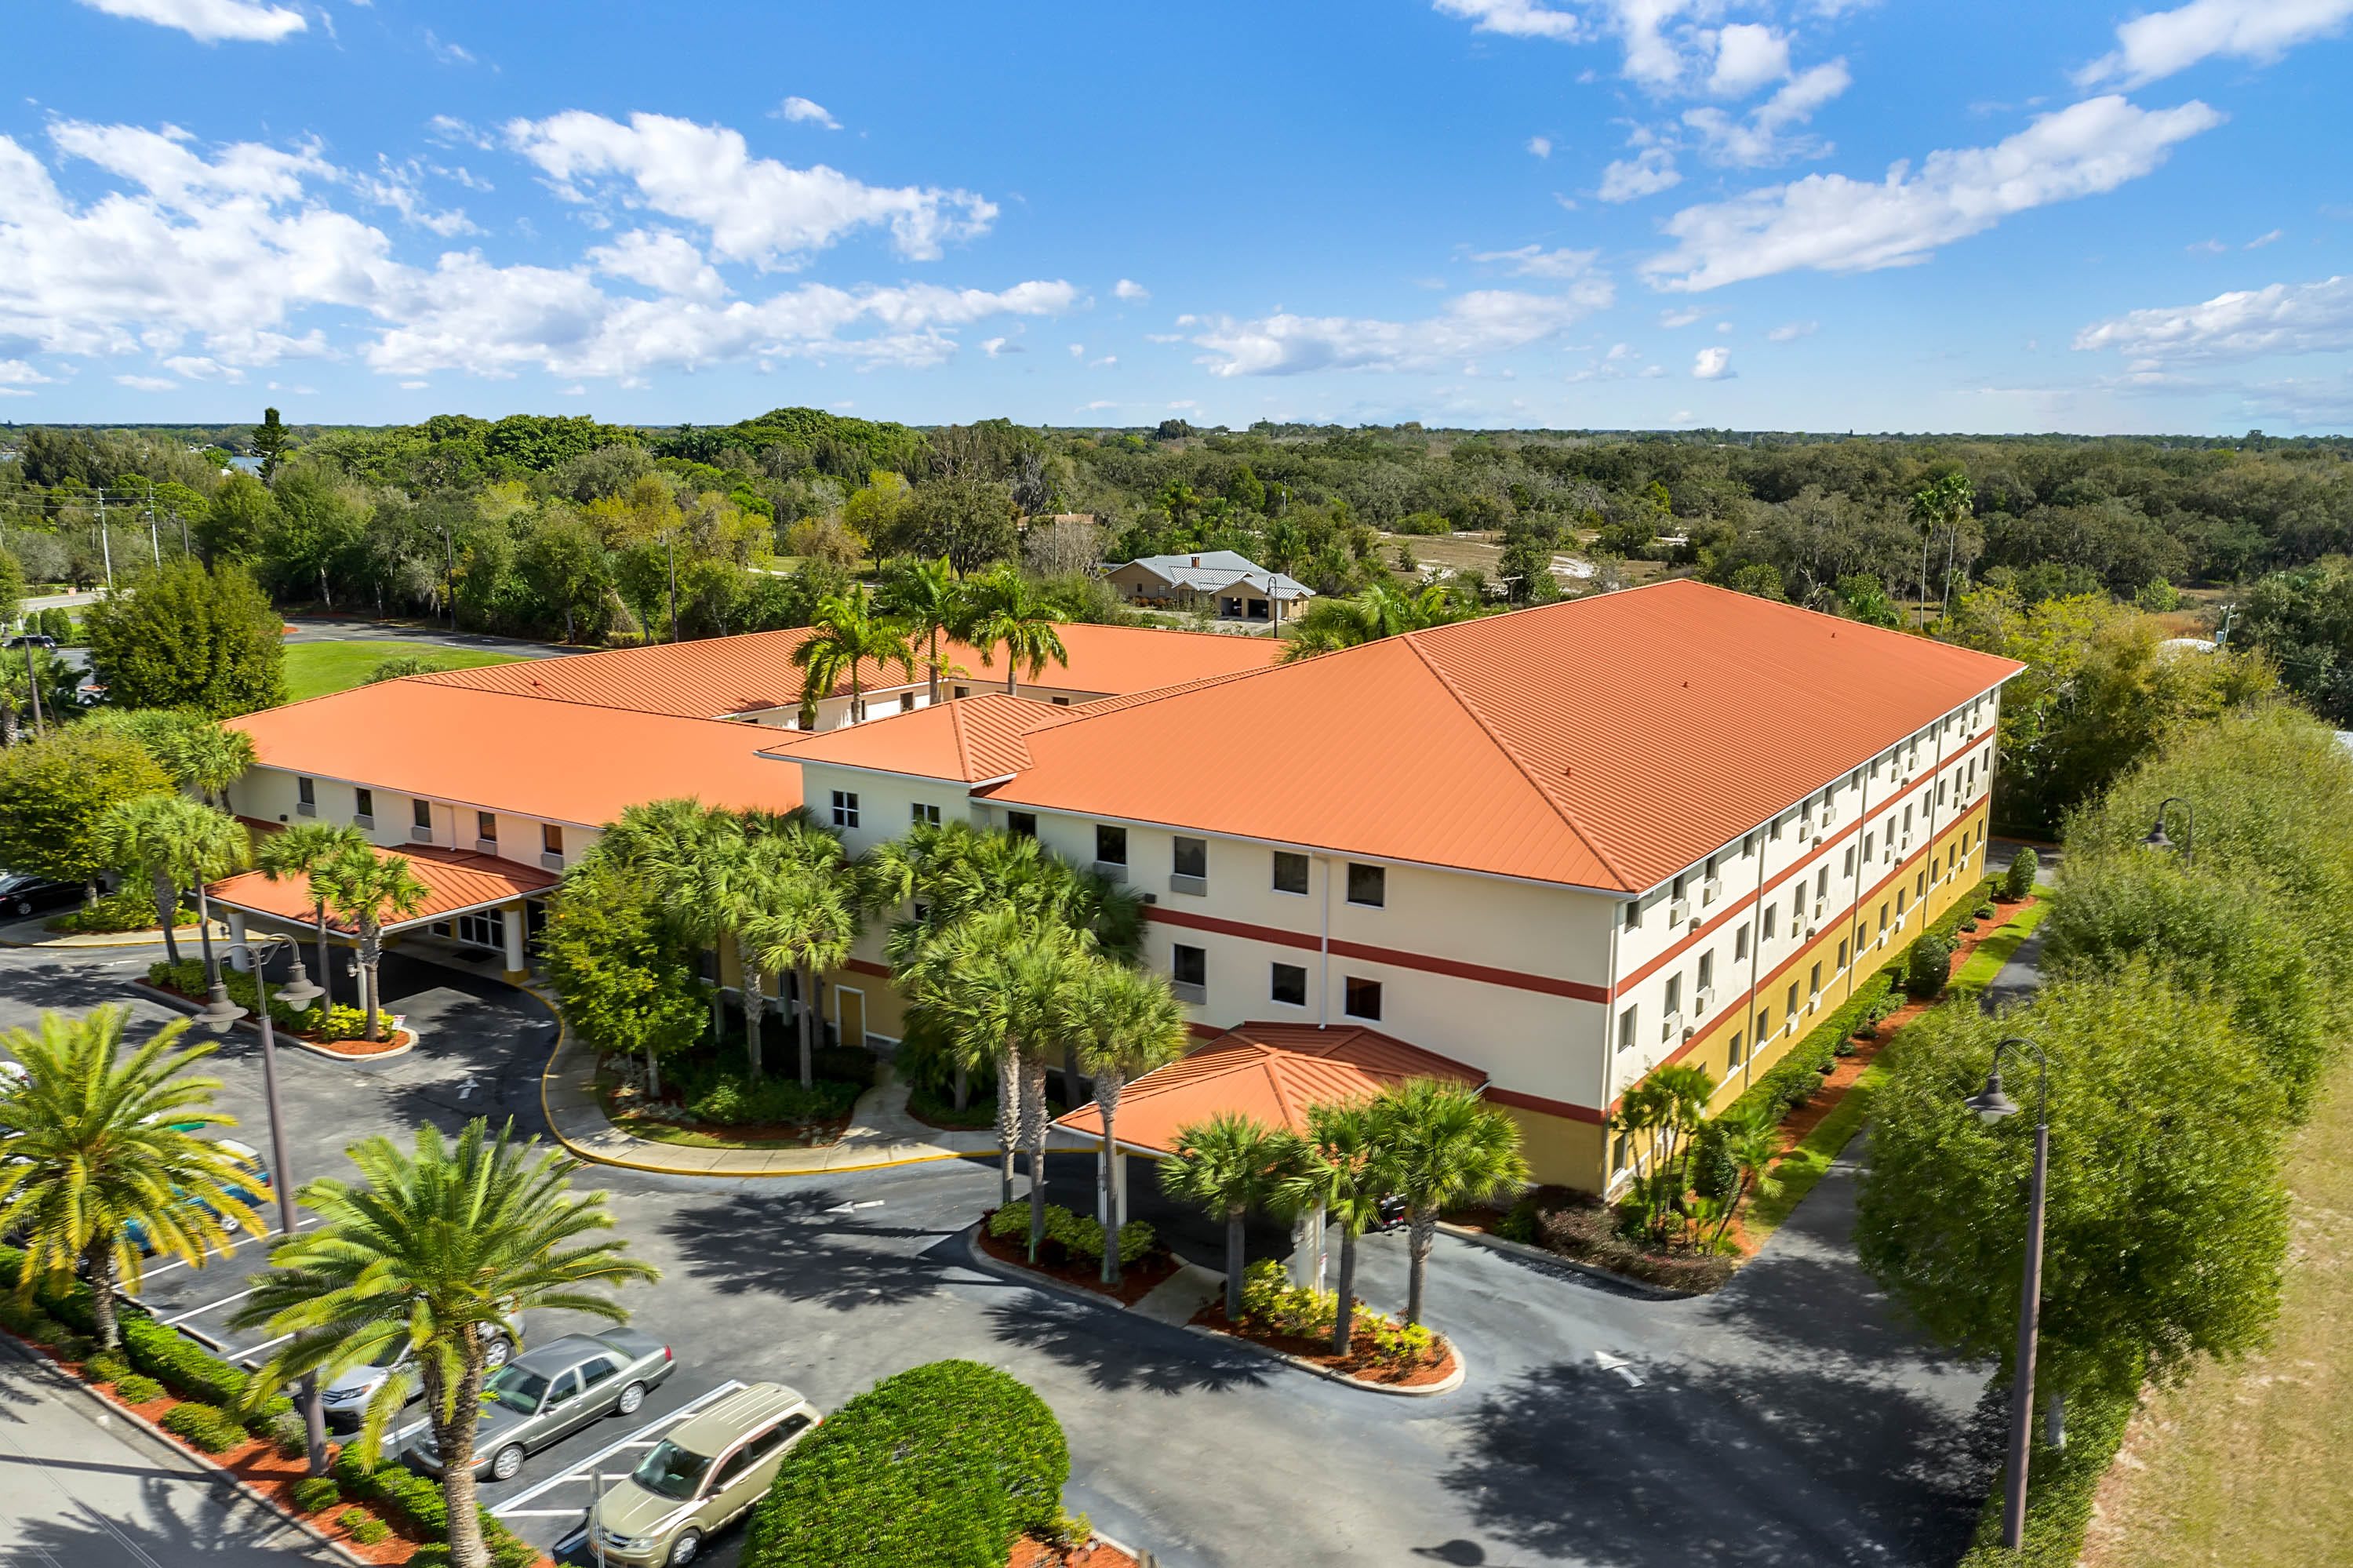 Balmoral Assisted Living aerial view of community